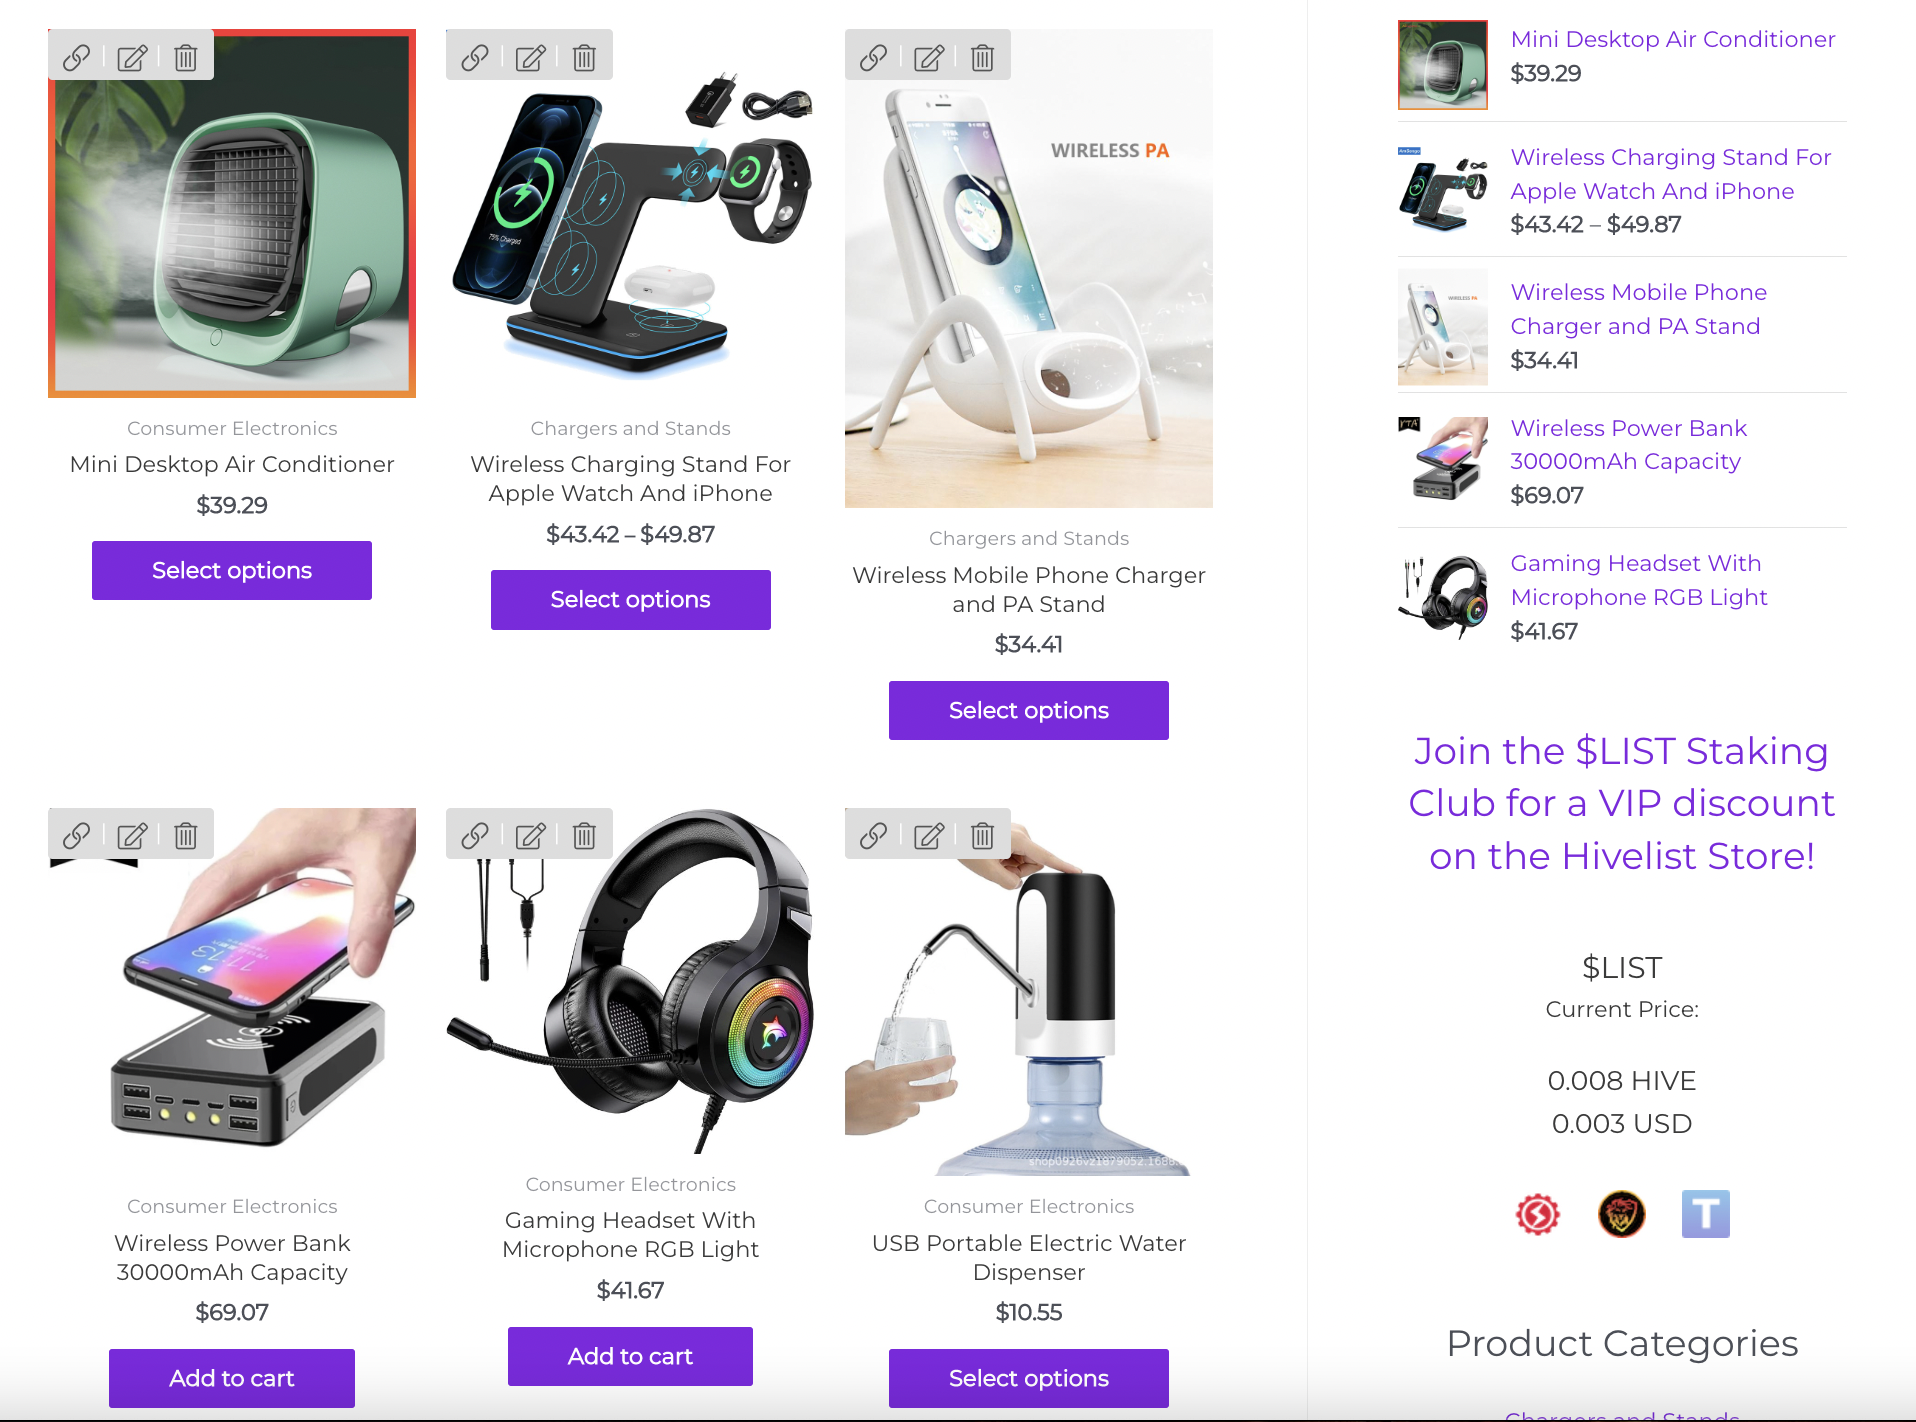 @hivelist/consumer-electronic-and-more-now-on-the-hivelist-store